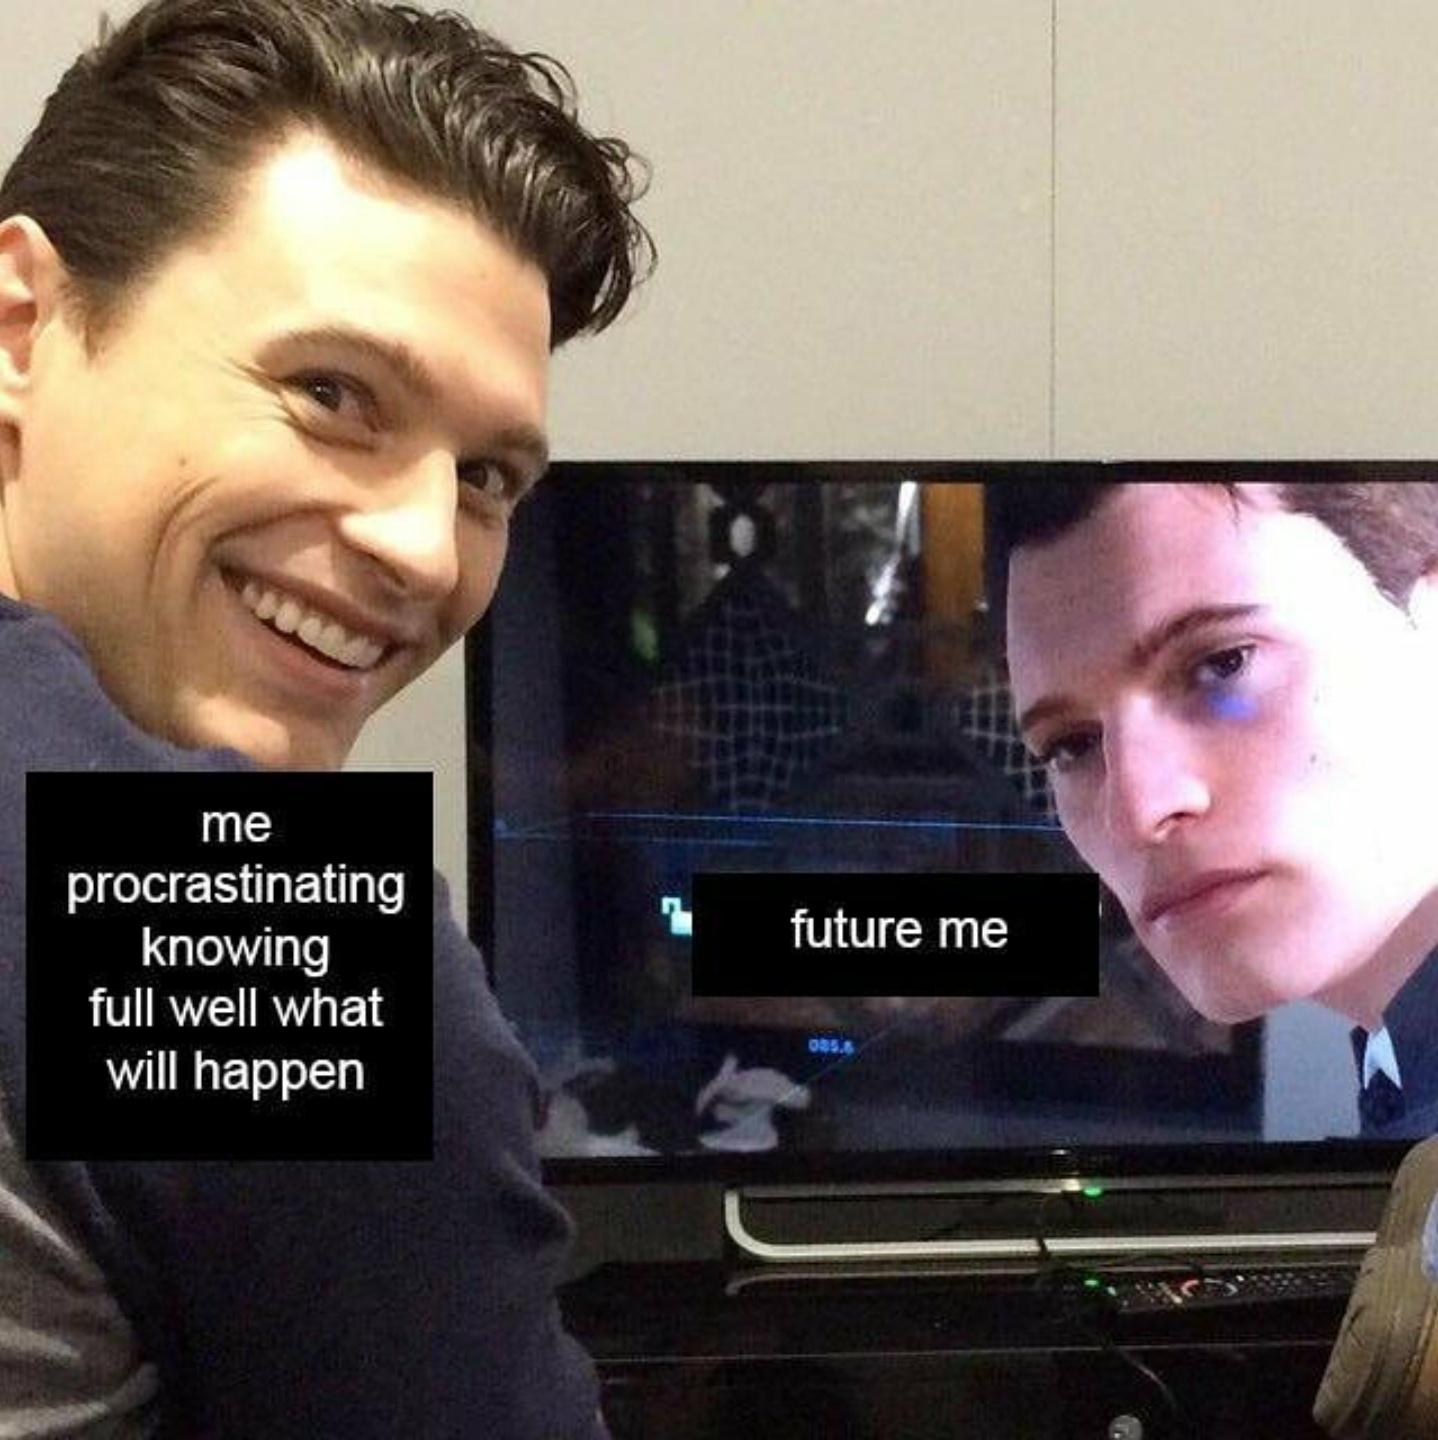 funny gaming memes - Detroit: Become Human - me future me procrastinating knowing full well what will happen